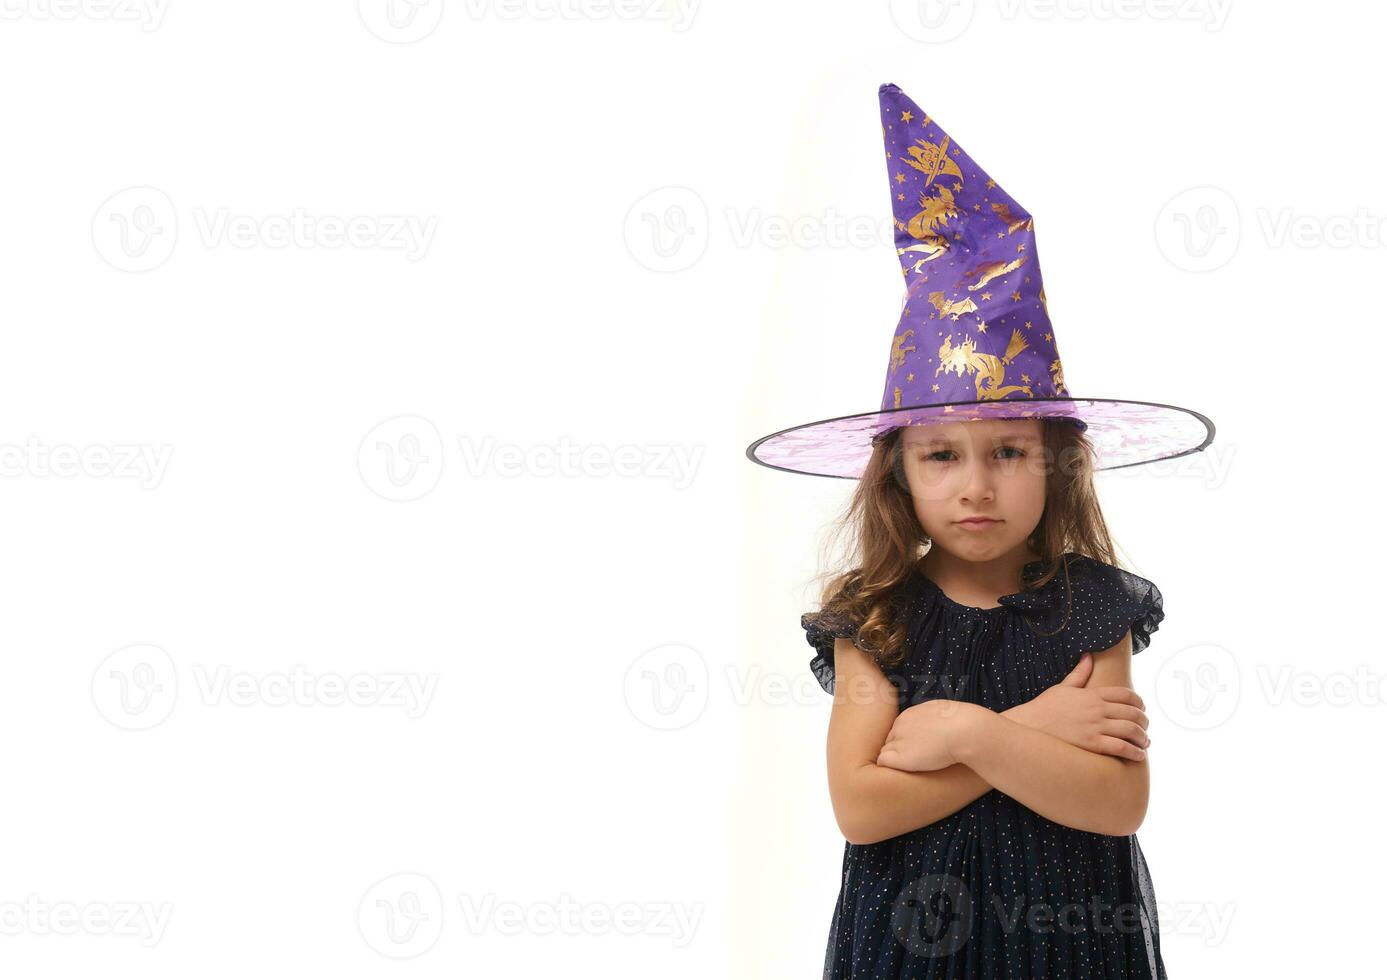 Portrait of cute little witch angry upset girl wearing a wizard hat and dressed in stylish carnival dress, looking at camera posing with crossed arms against white background, copy space, Halloween photo